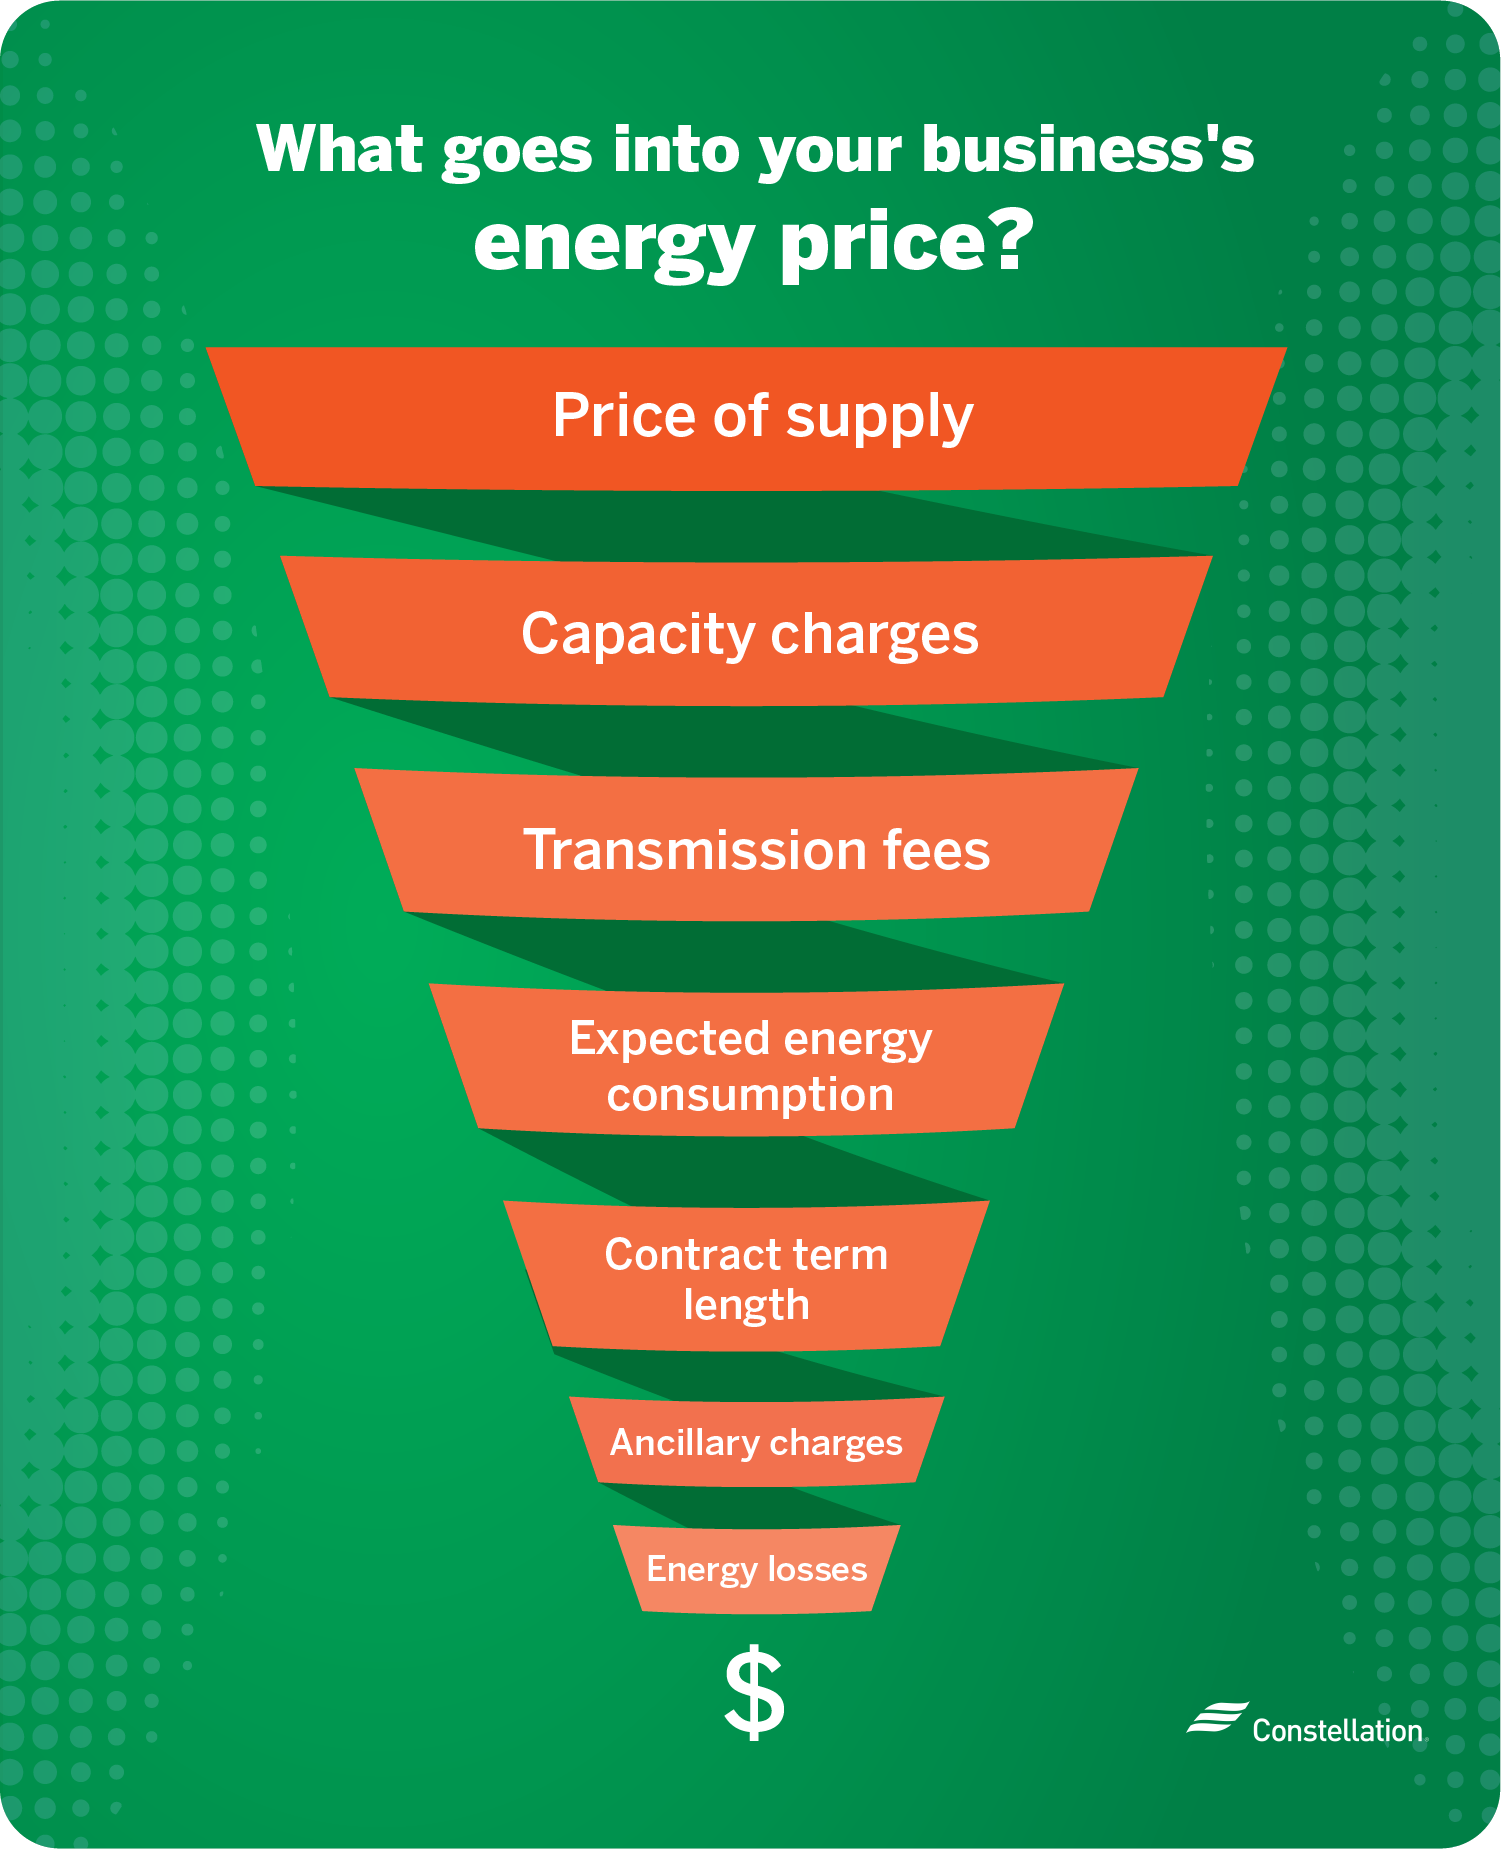 What goes into your business's energy price